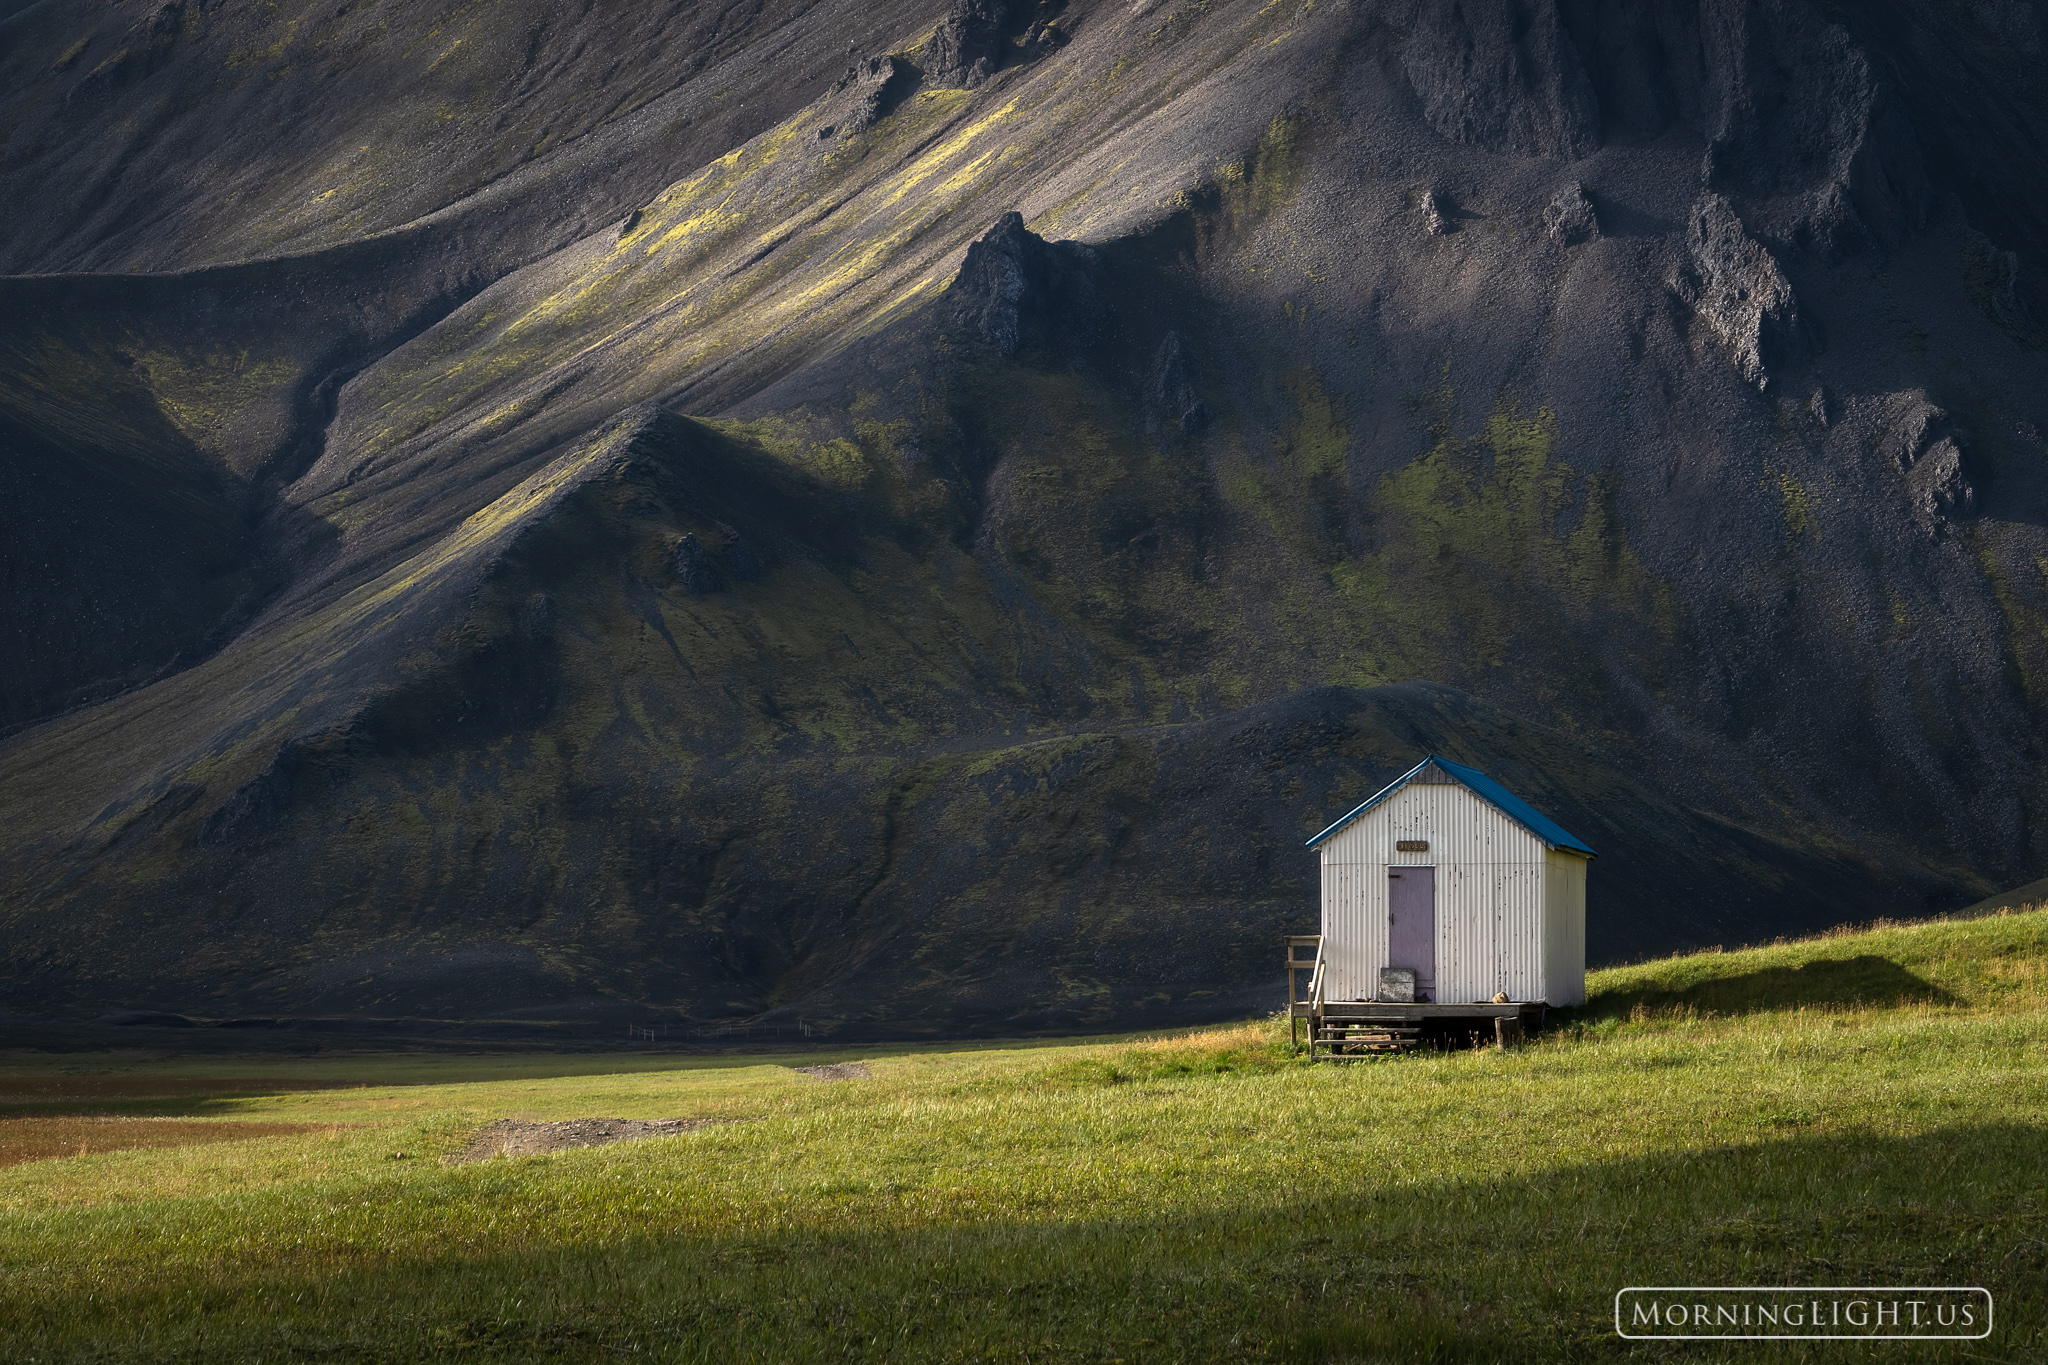 While driving on some back roads in the Icelandic Highlands I came across this small building at the edge of a rugged mountain...